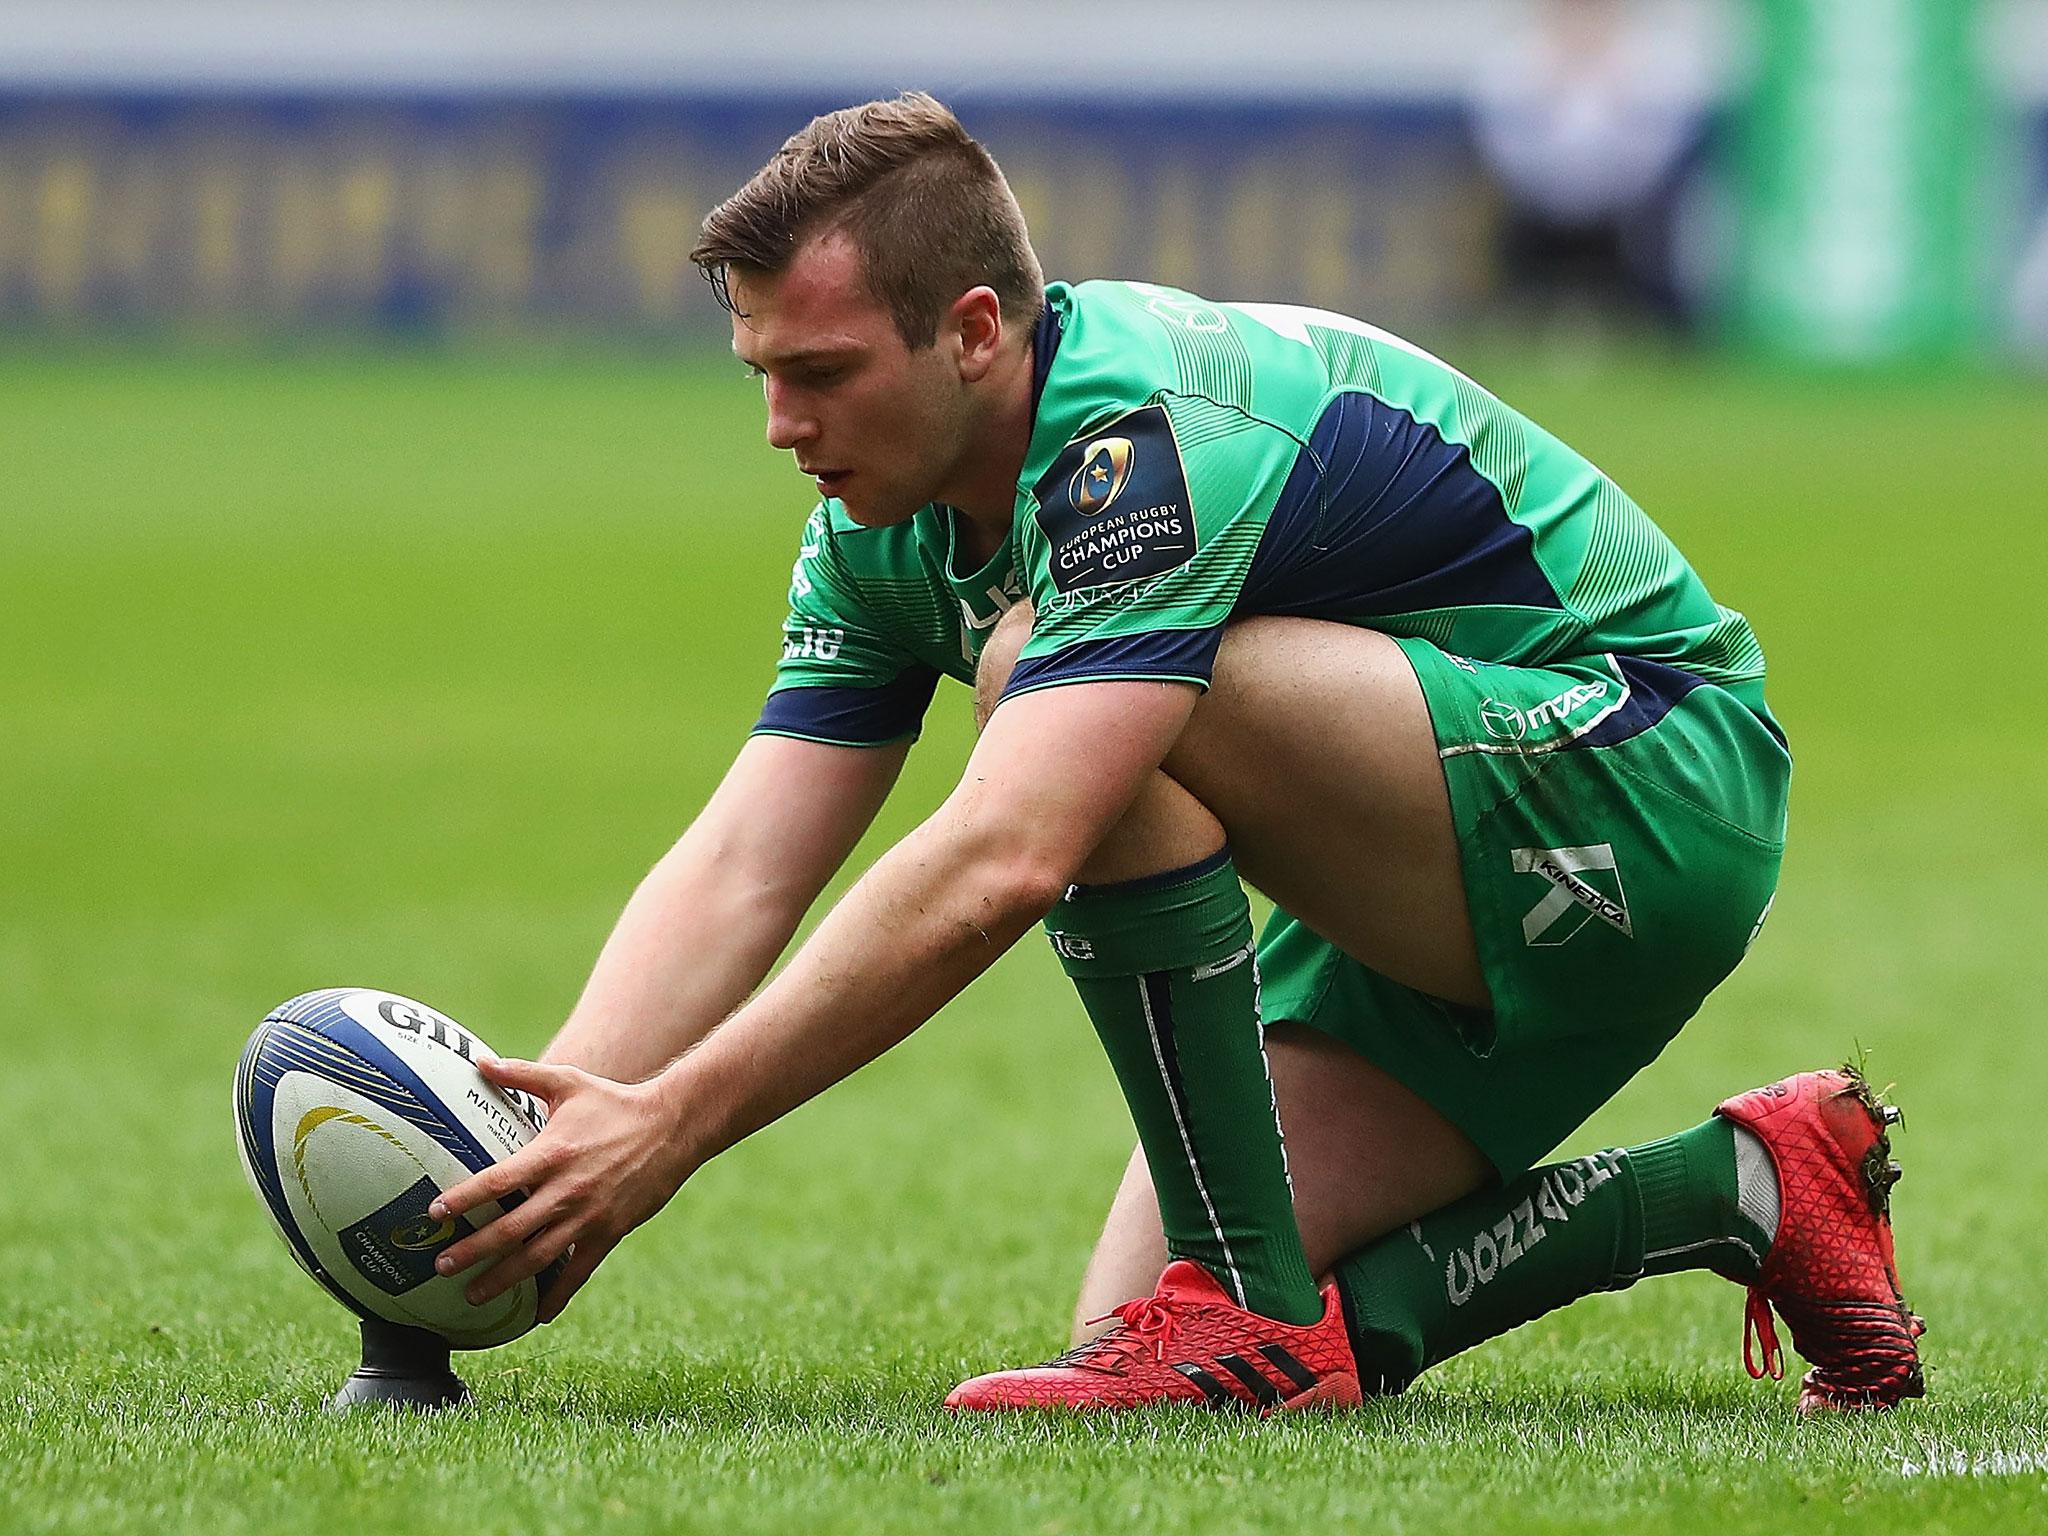 Connacht fly-half Jack Carty won the match with a last-minute conversion